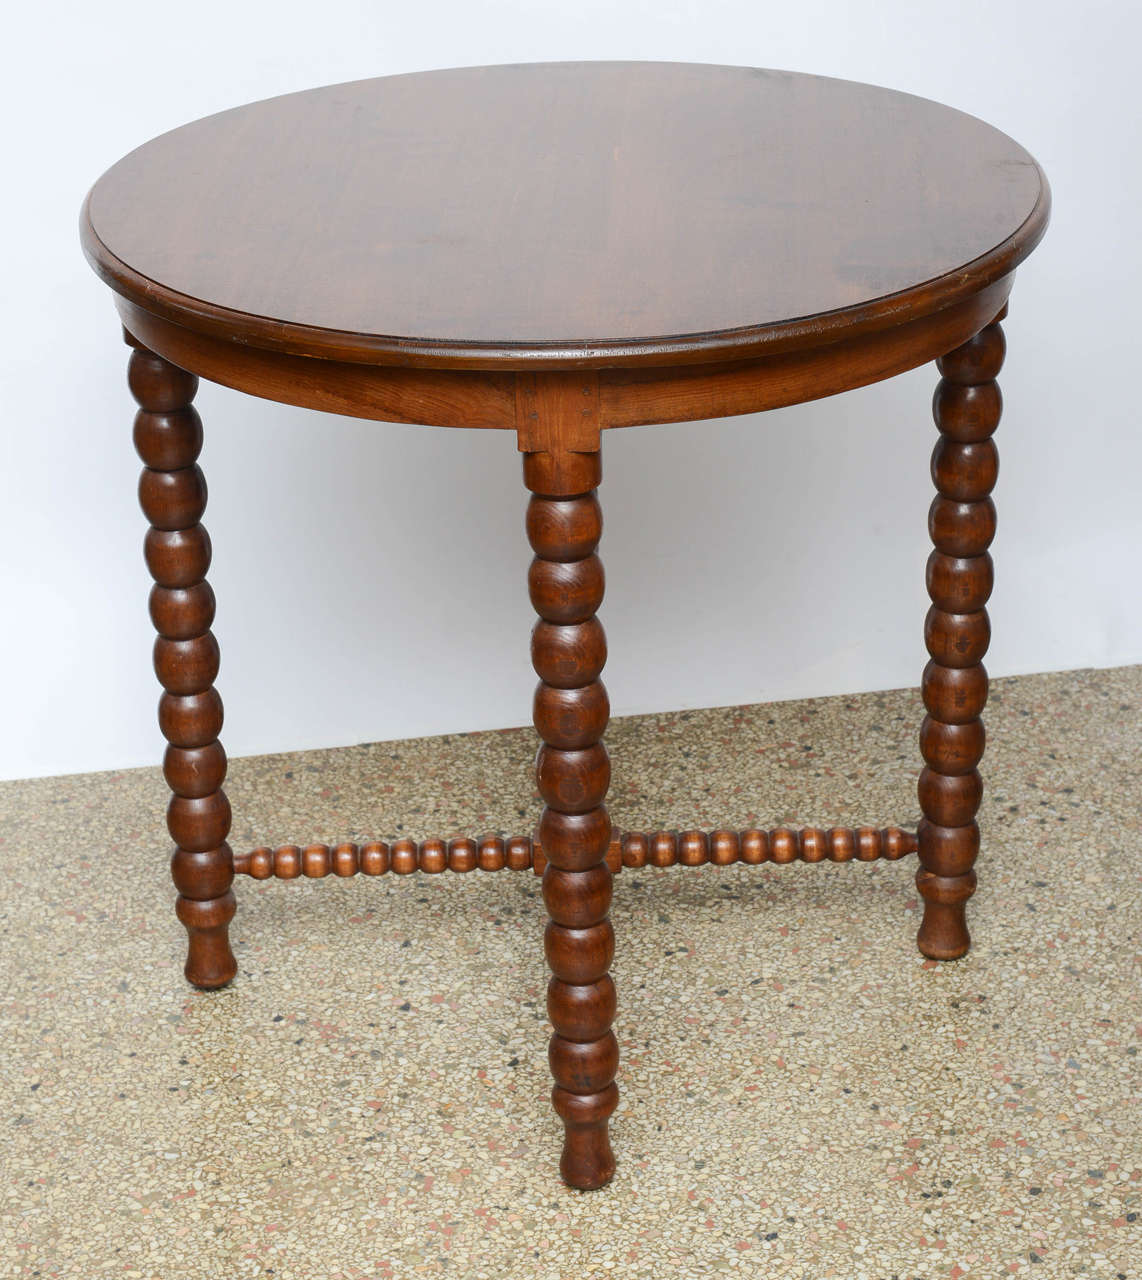 British Pair of English Dining, Game, Center Tables with Barley Twist Legs